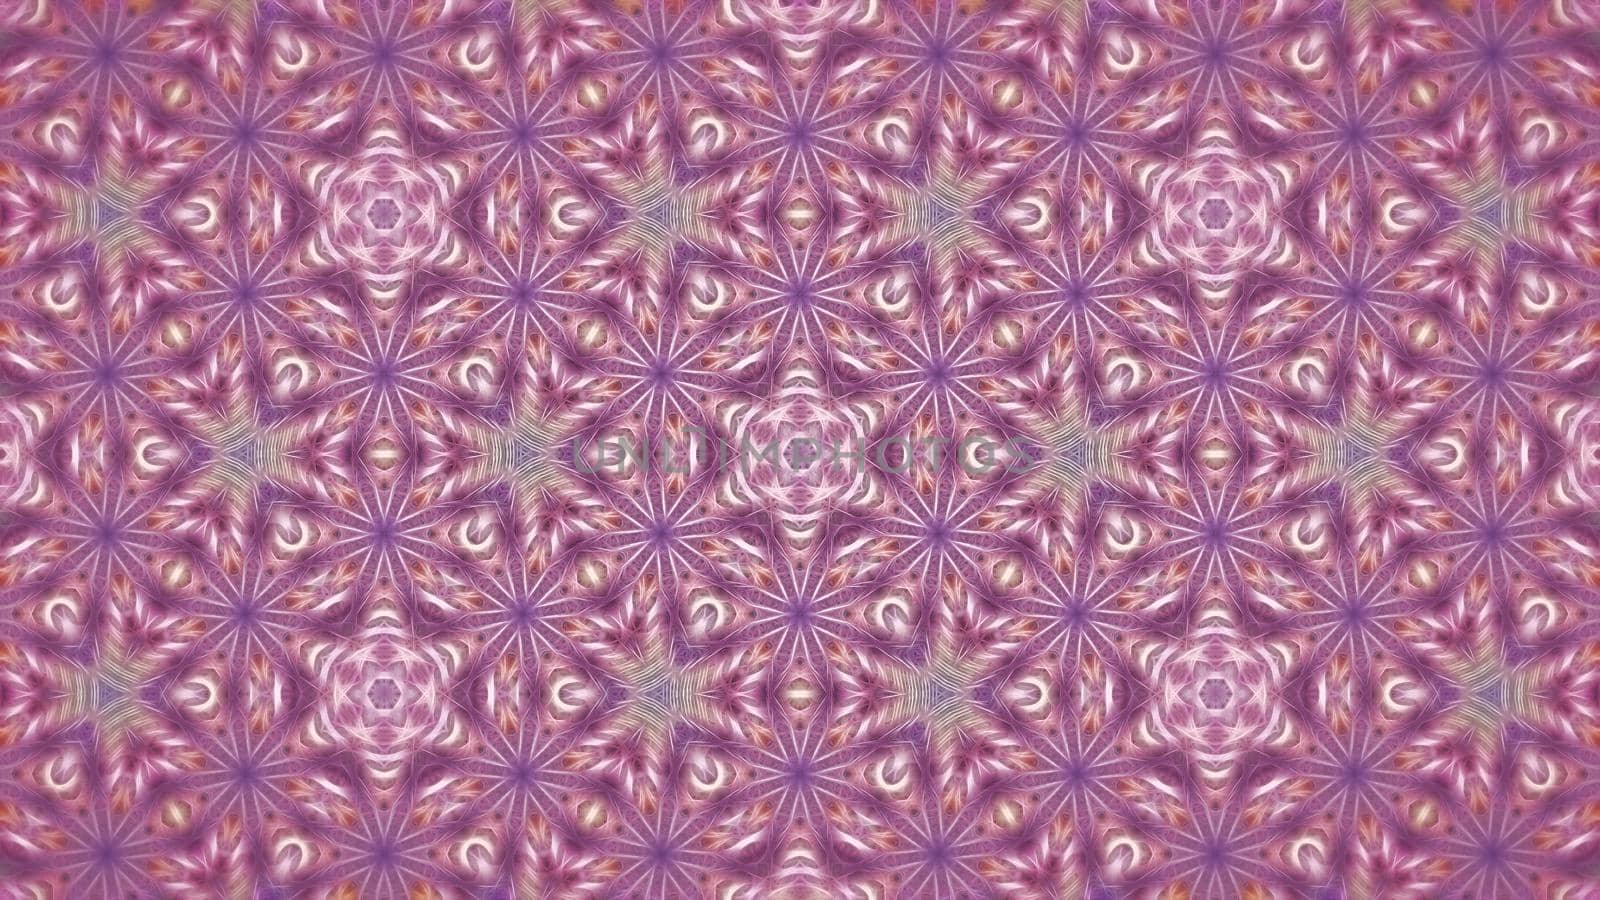 Abstract kaleidoscope background with a symmetrical pattern.